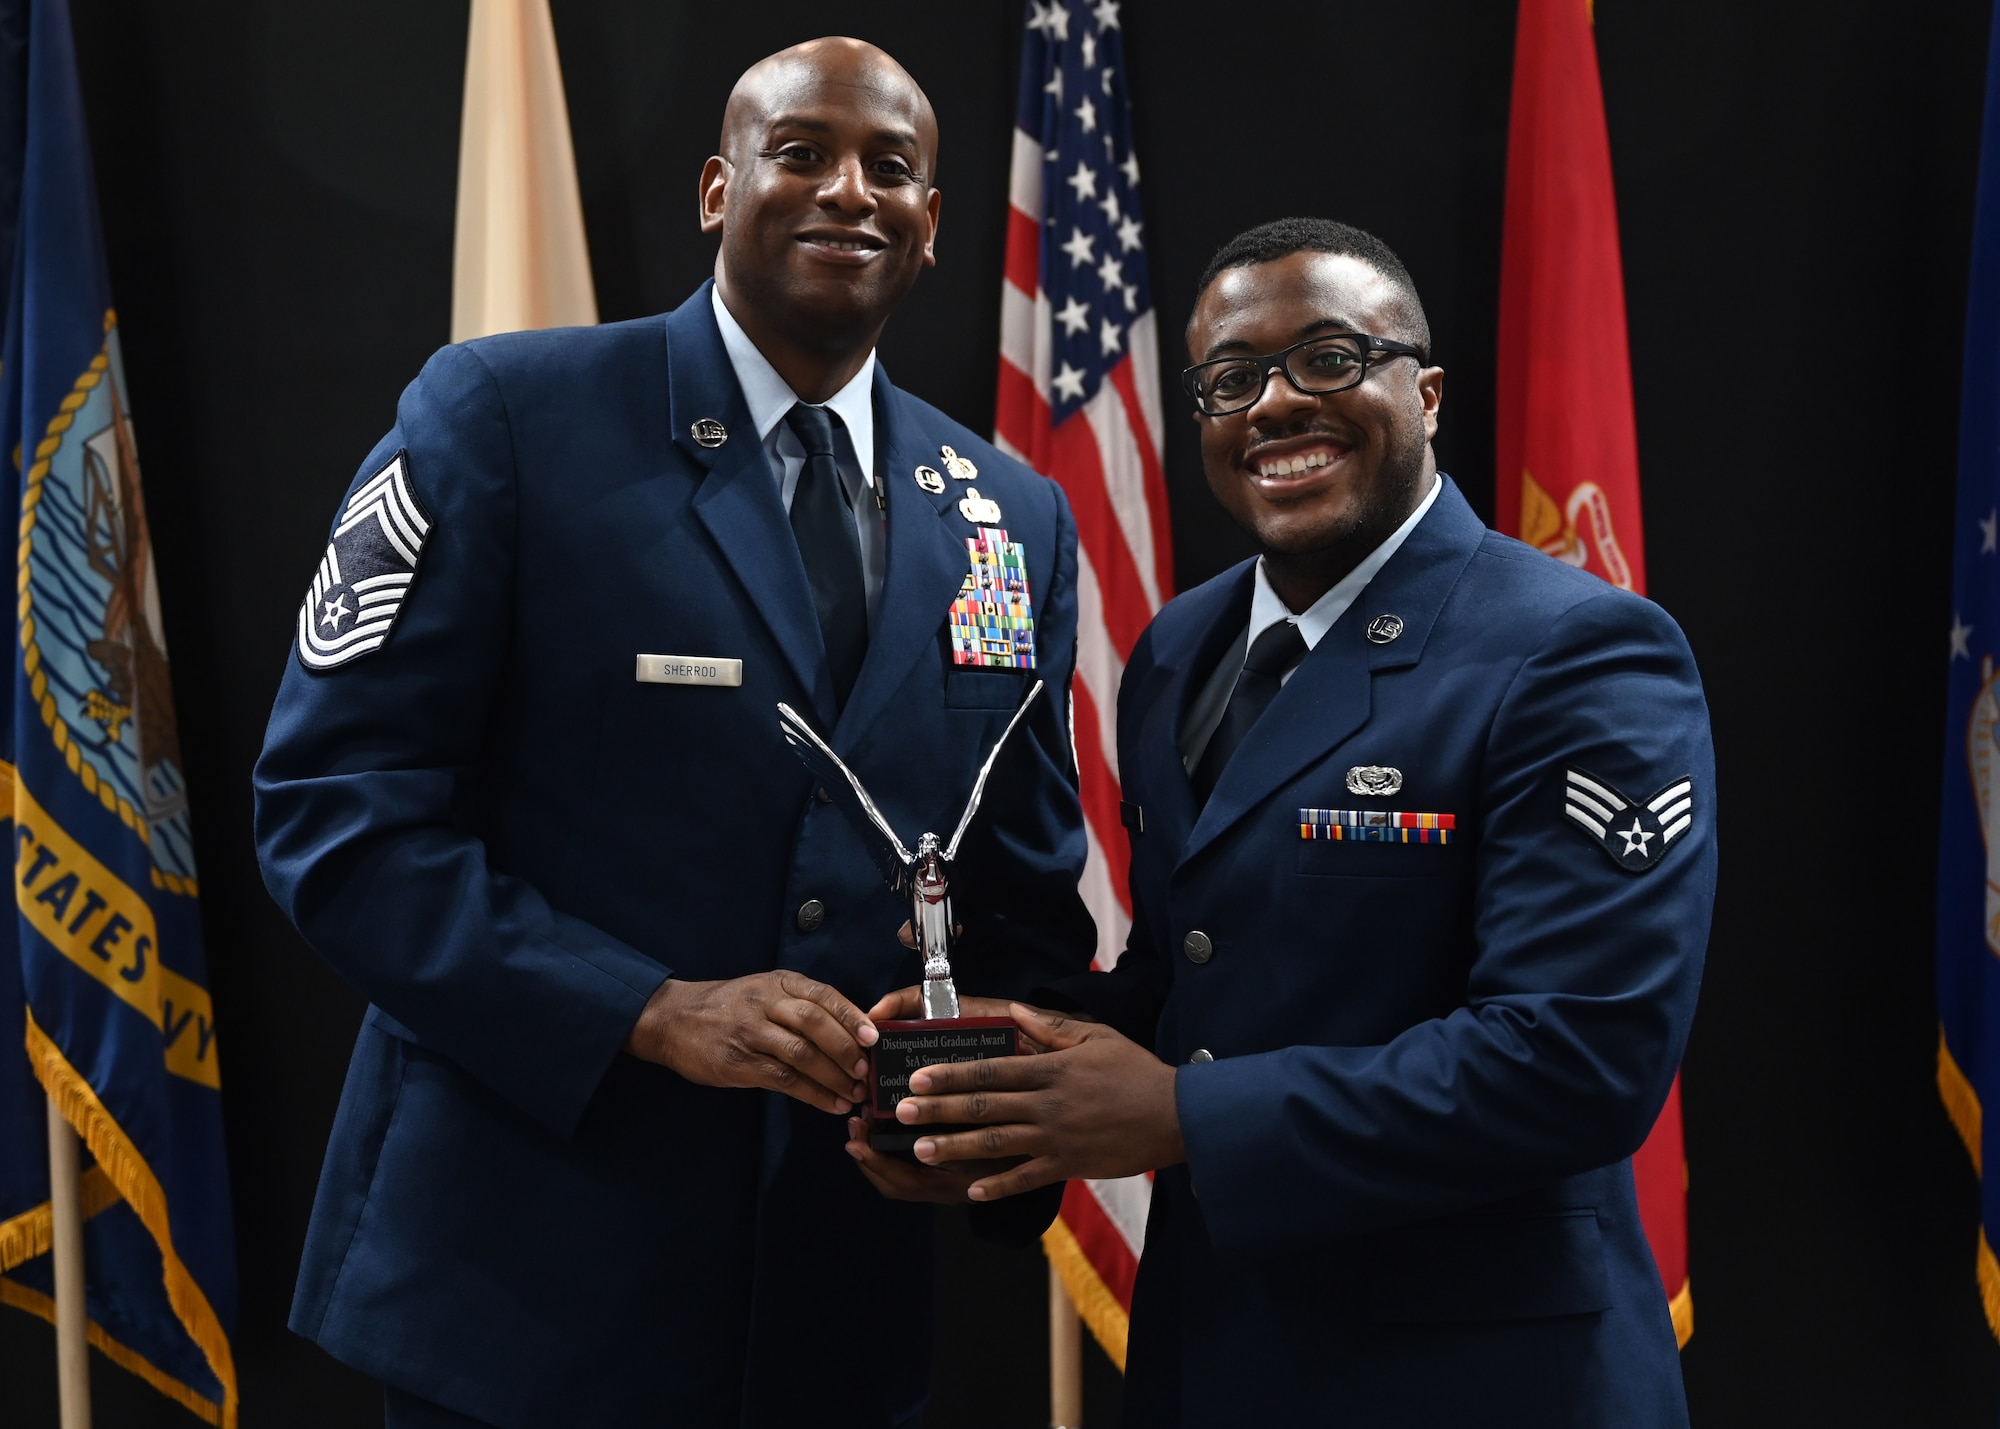 U.S. Air Force Chief Master Sgt. Derrick Sherrod, 17th Mission Support Group senior enlisted leader, presents the Distinguished Graduate Award to Senior Airman Steven Green II, Class 23-E Airman Leadership School graduate, at the Class 23-E ALS graduation in the Powell Event Center, Goodfellow Air Force Base, Texas, July 20, 2023. The Distinguished Graduate Award recognizes the student who is in the top 10 percent of their class based on performance tasks, peer stratifications, and the capstone exercise. (U.S. Air Force photo by Senior Airman Ethan Sherwood)